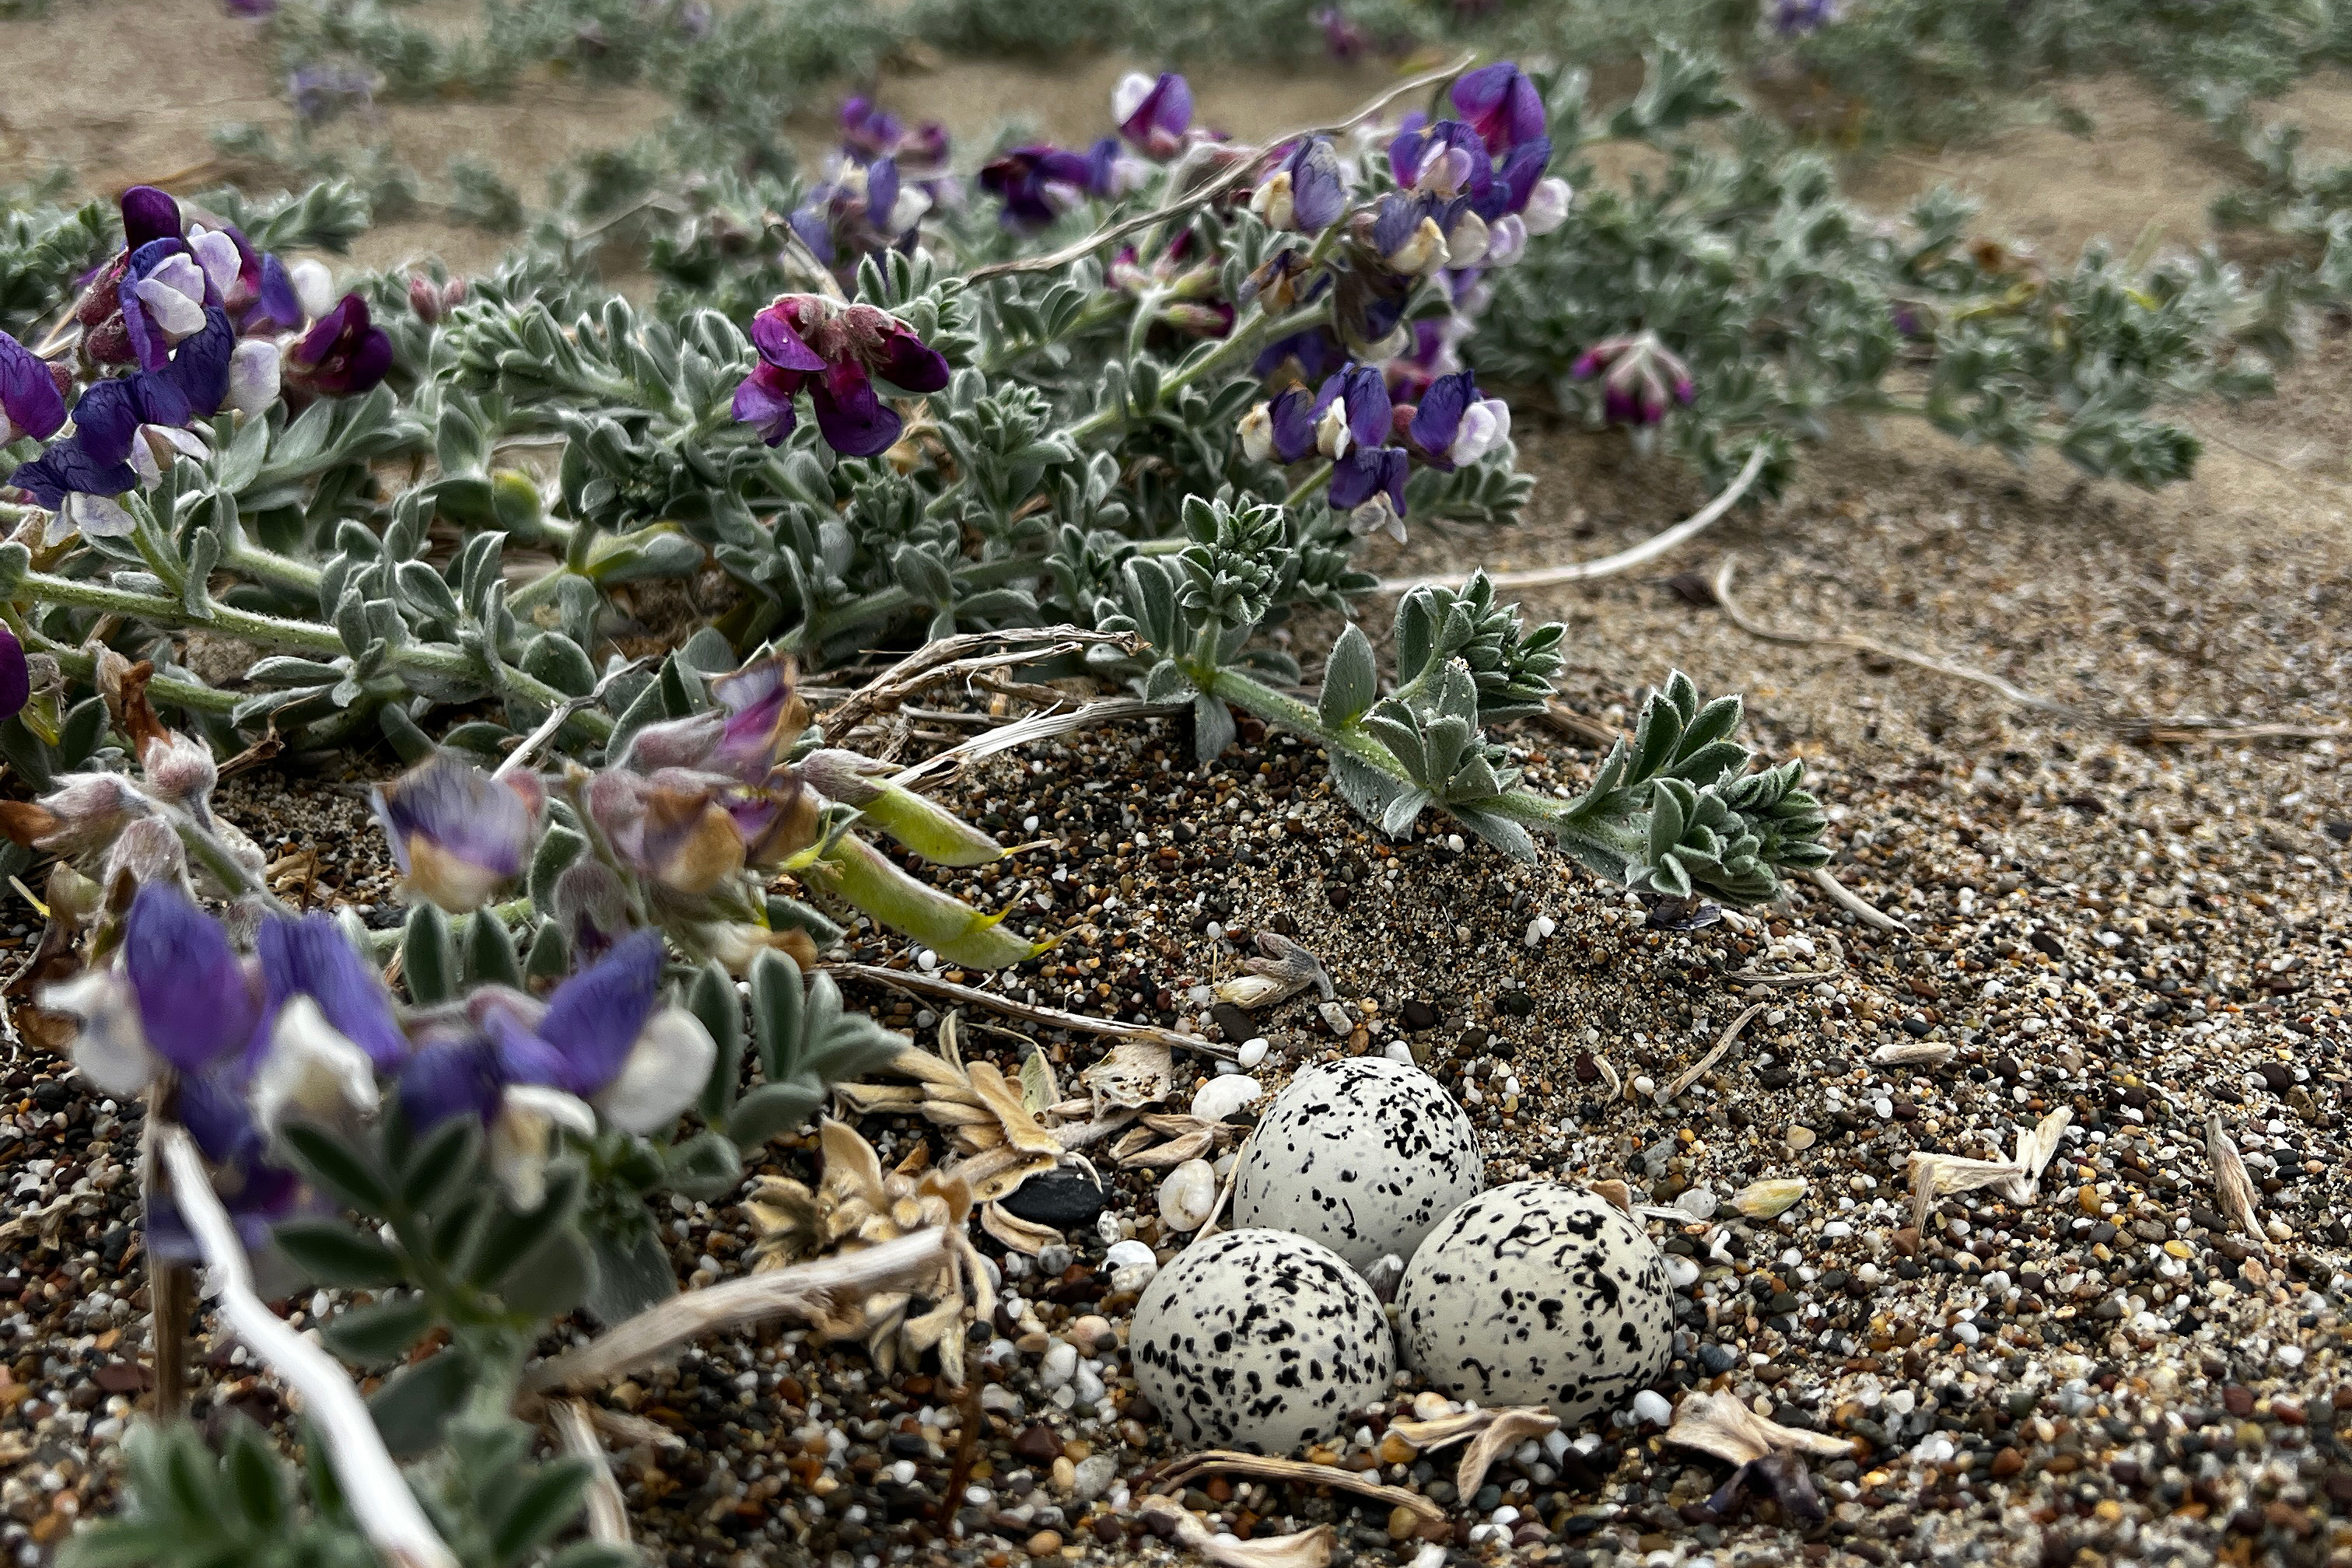 A photo of three small black-speckled, beige-colored egg sitting among plants with pea-like purple flowers